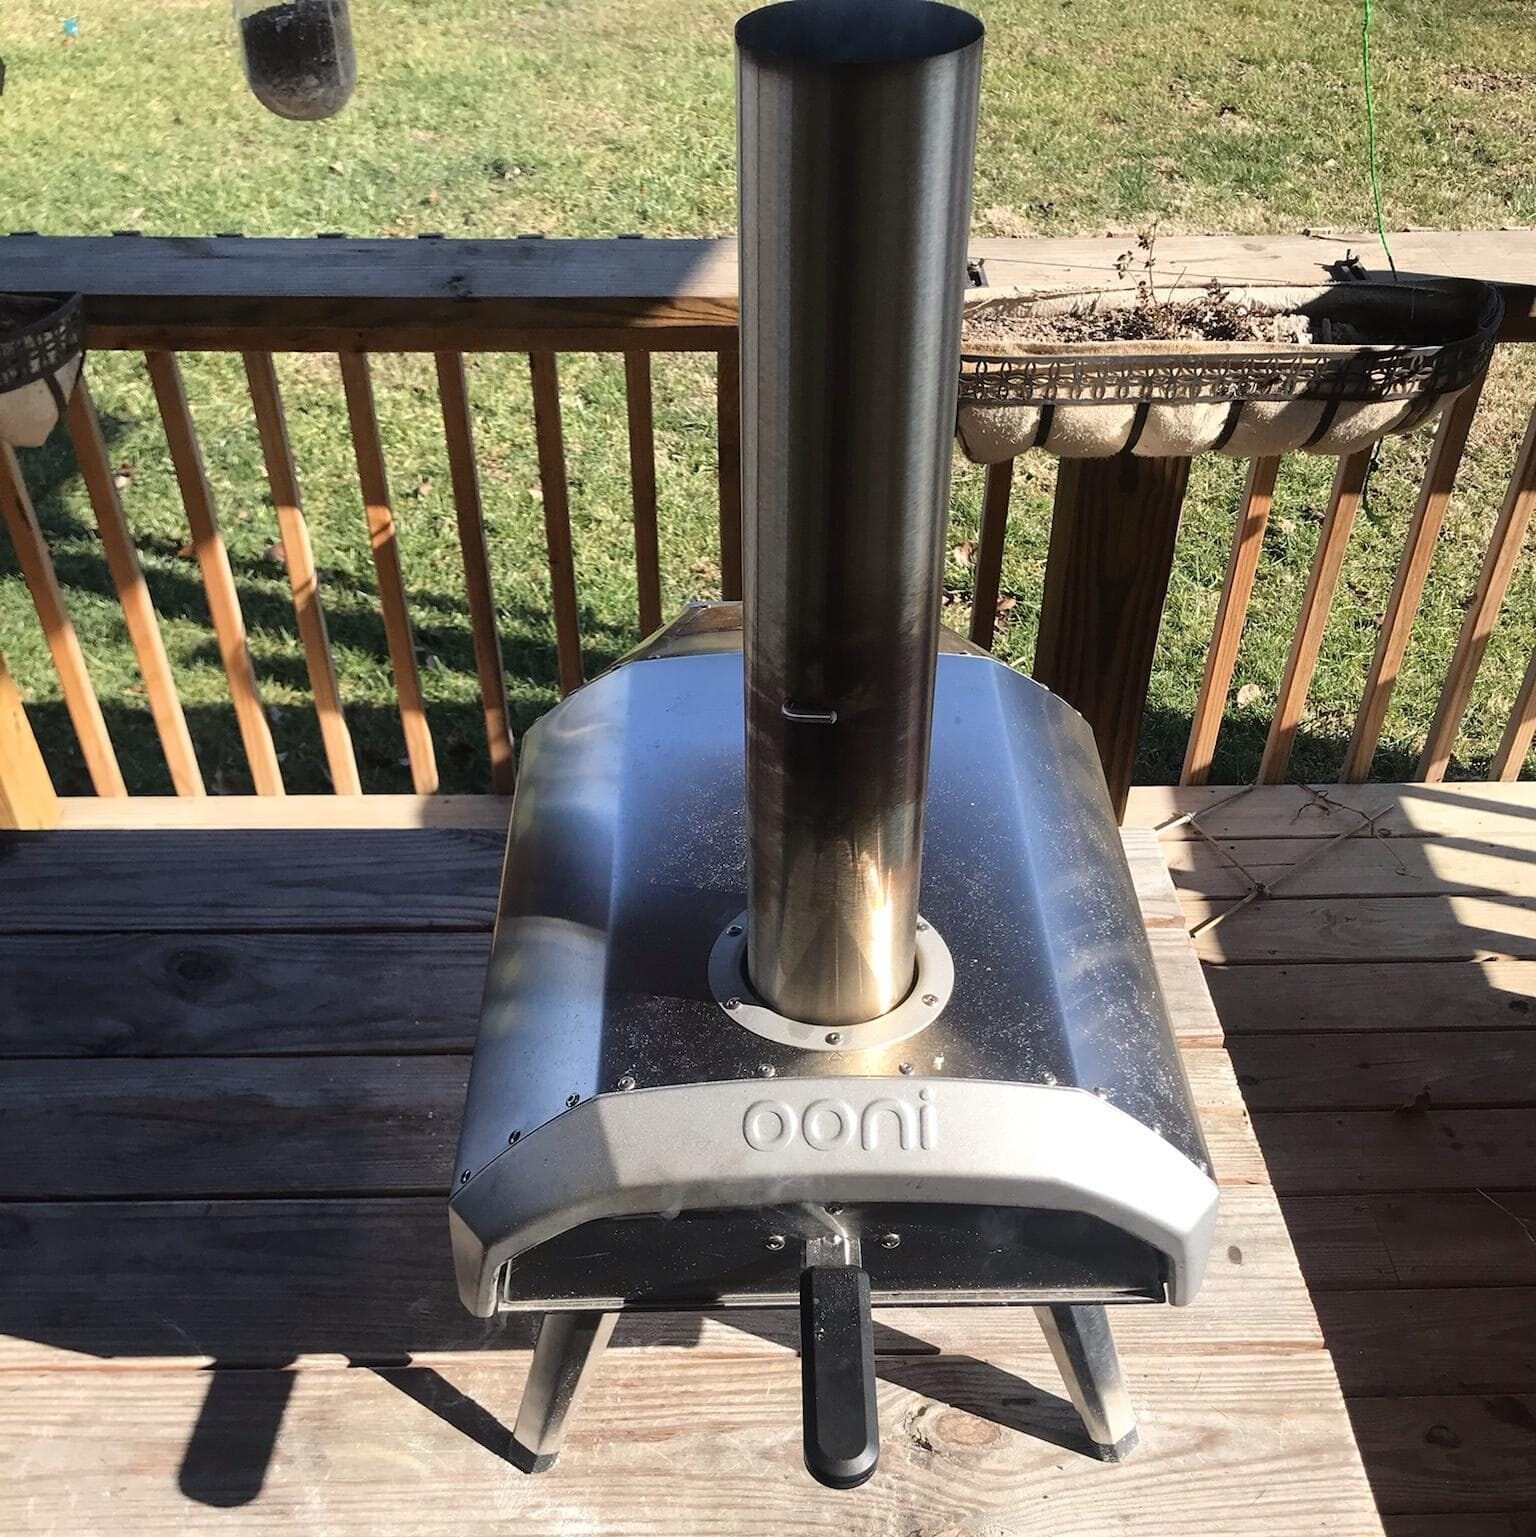 How To Clean Ooni Pizza Oven Chimney